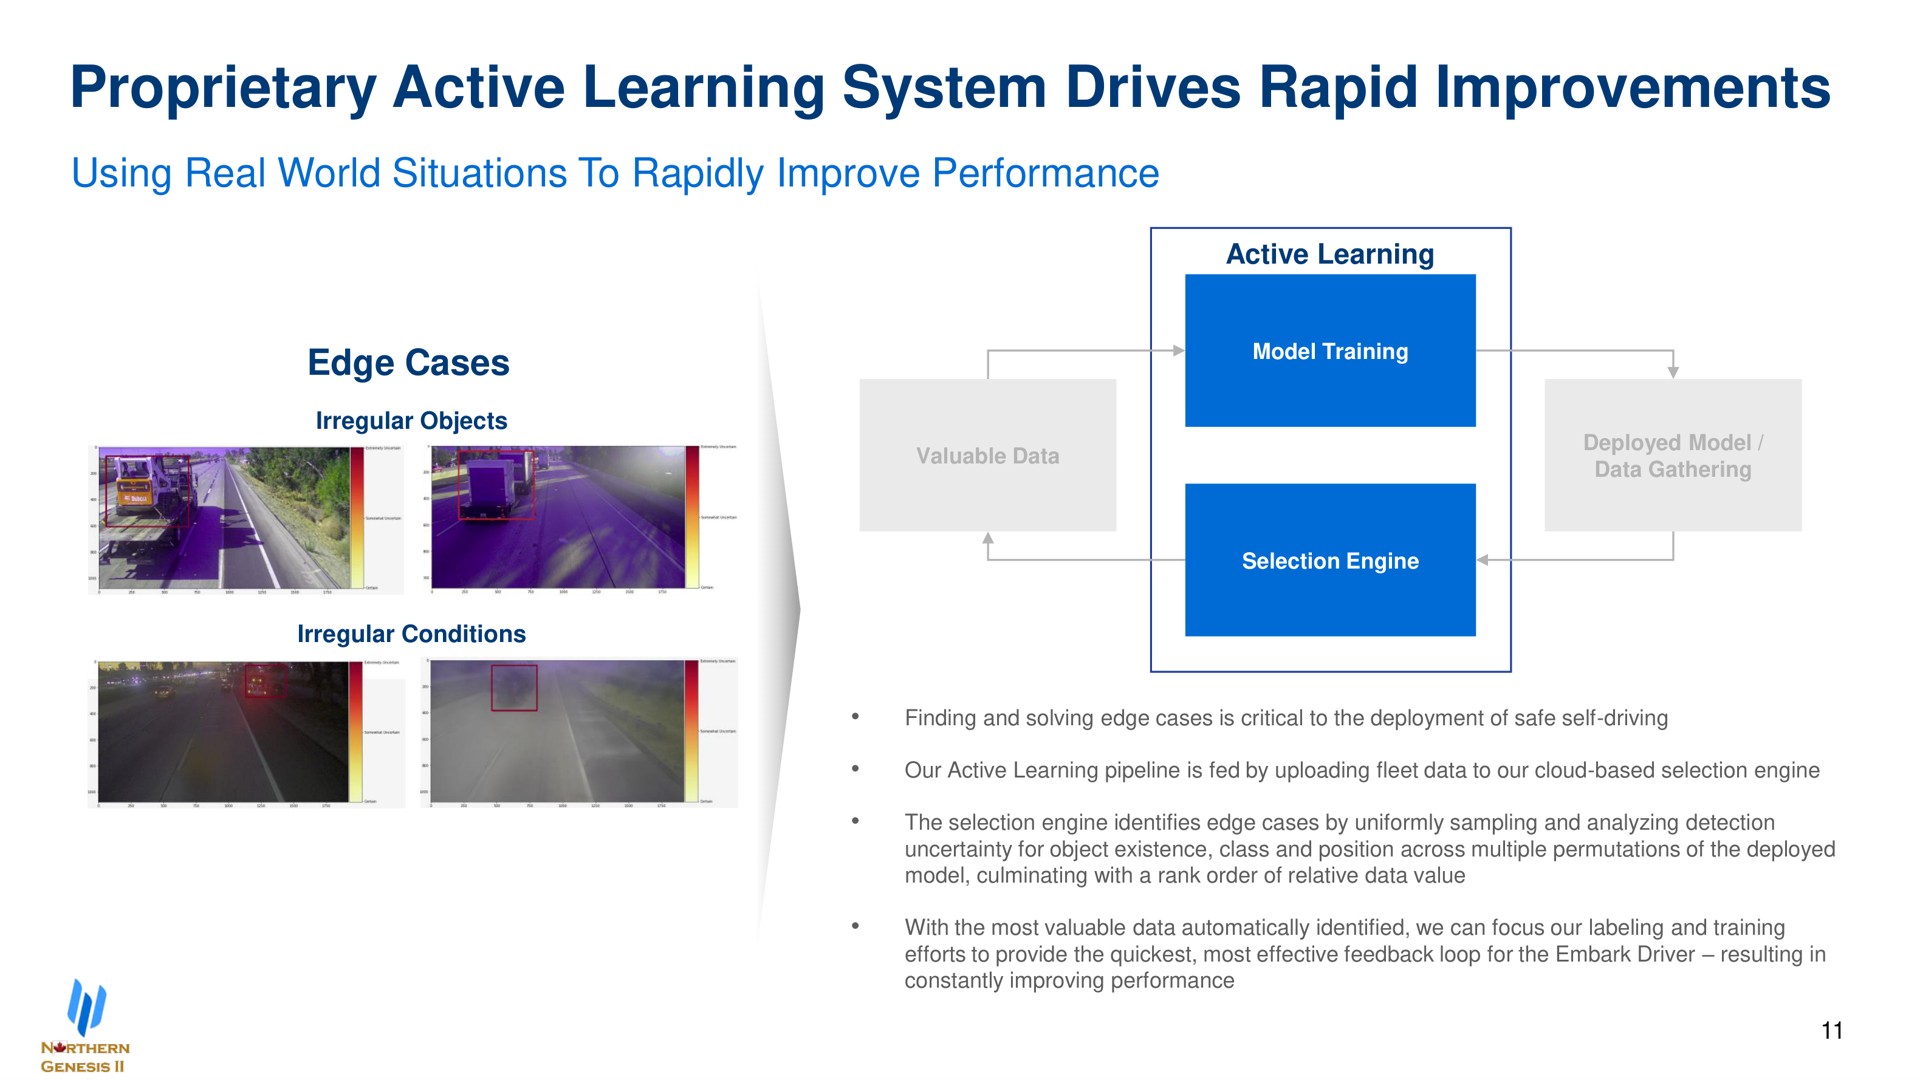 proprietary active learning system drives rapid improvements | Embark